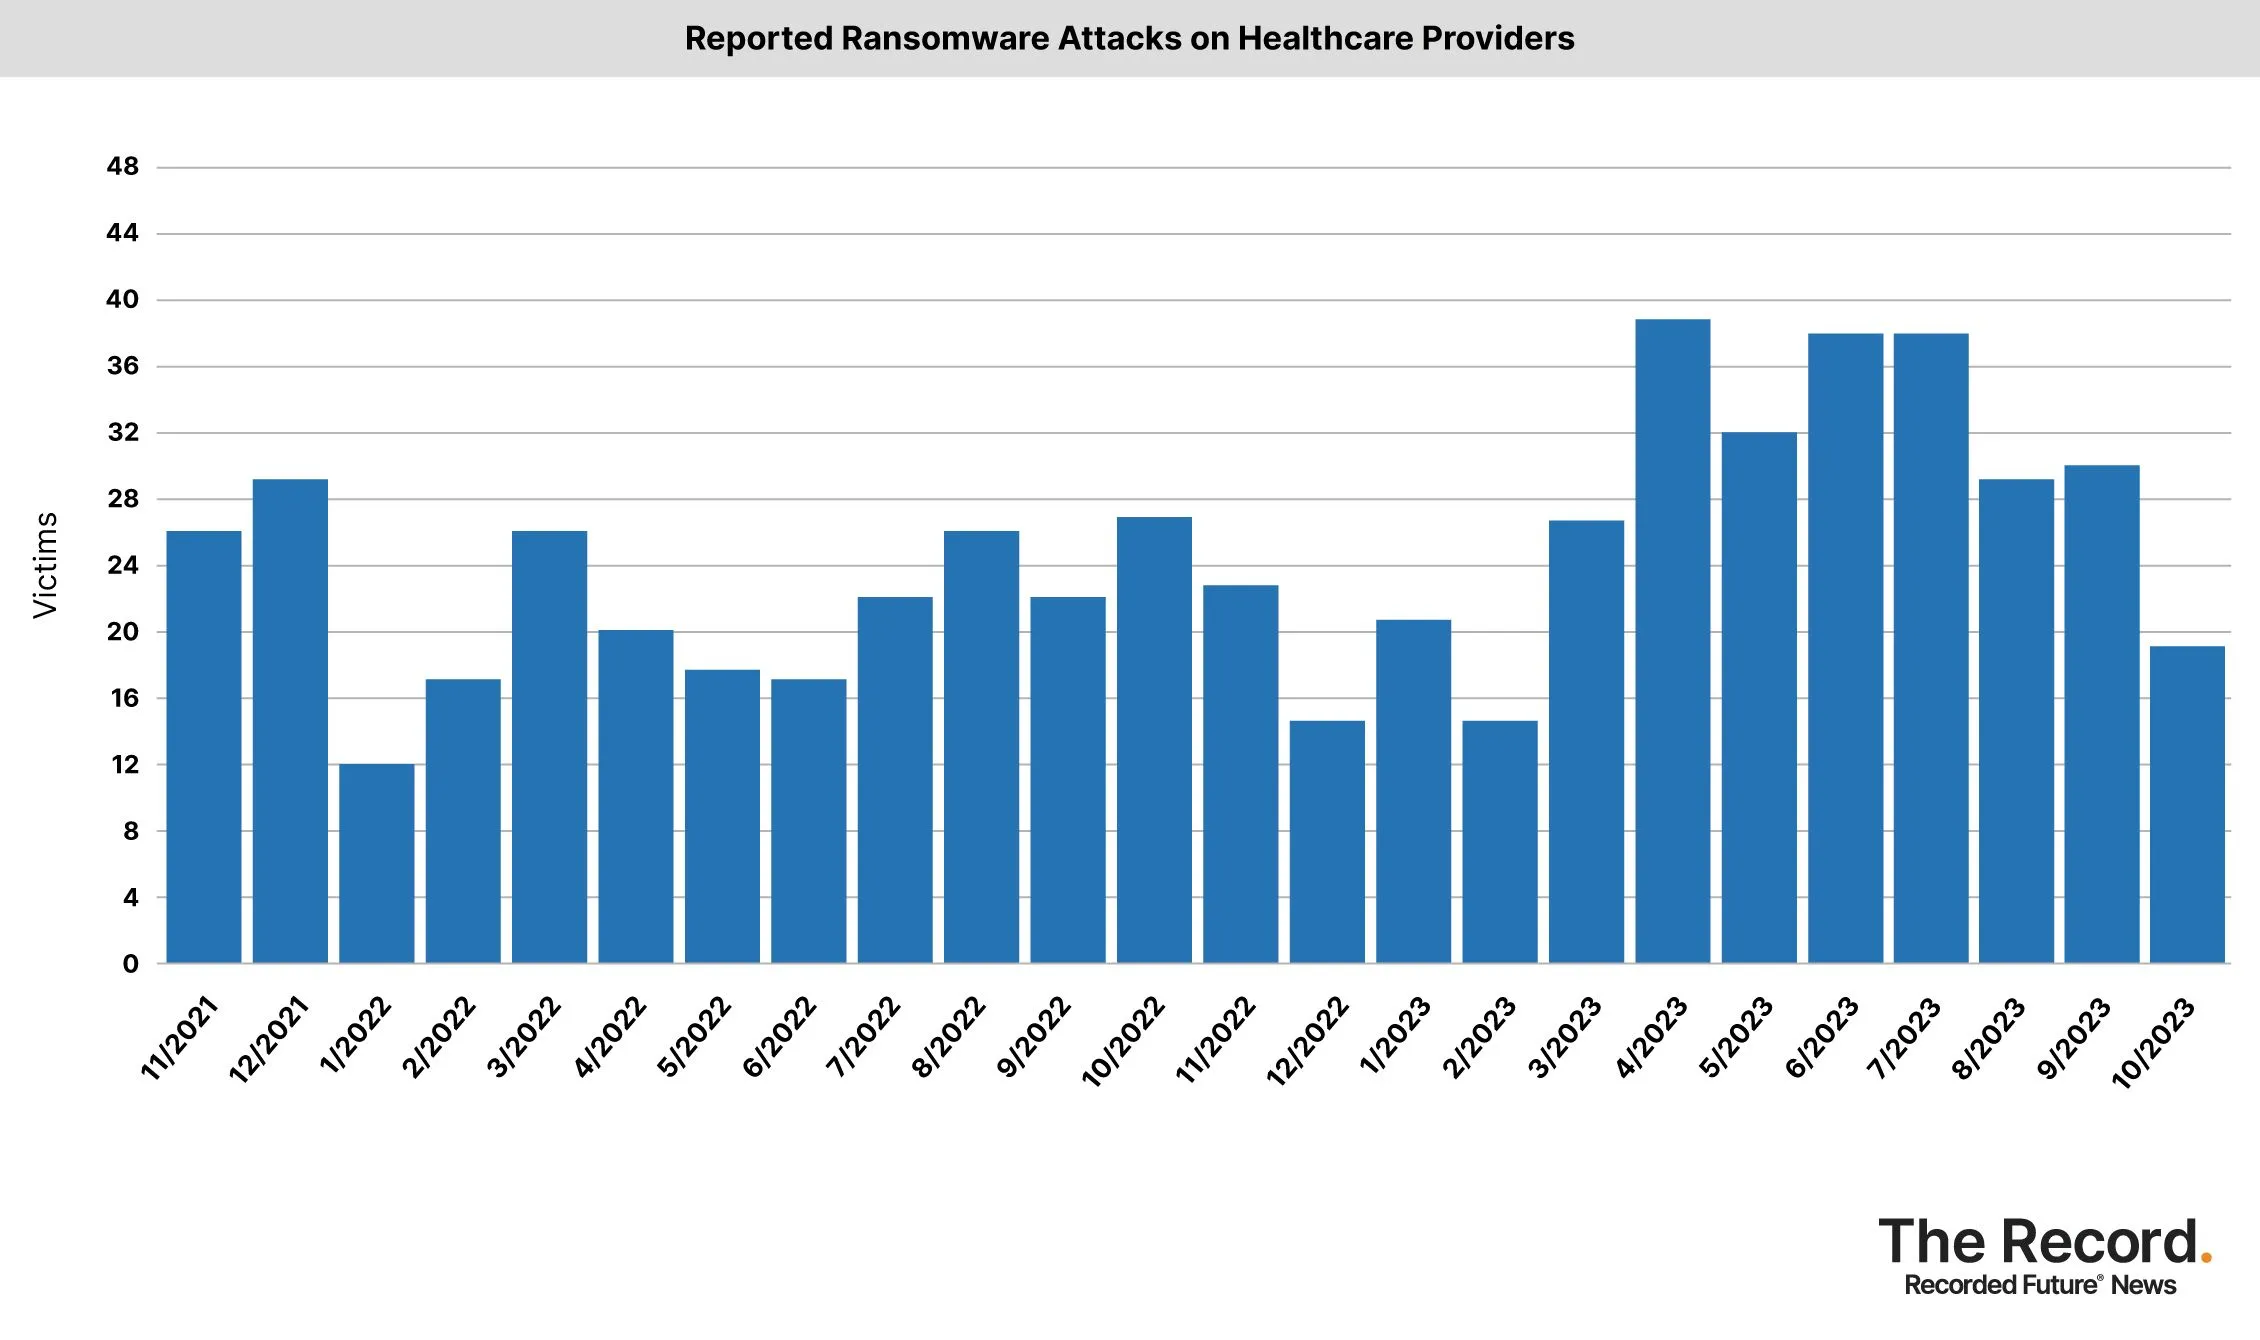 2023_1109 - Ransomware Tracker - Reported Ransomware Attacks on Healthcare Providers.jpg